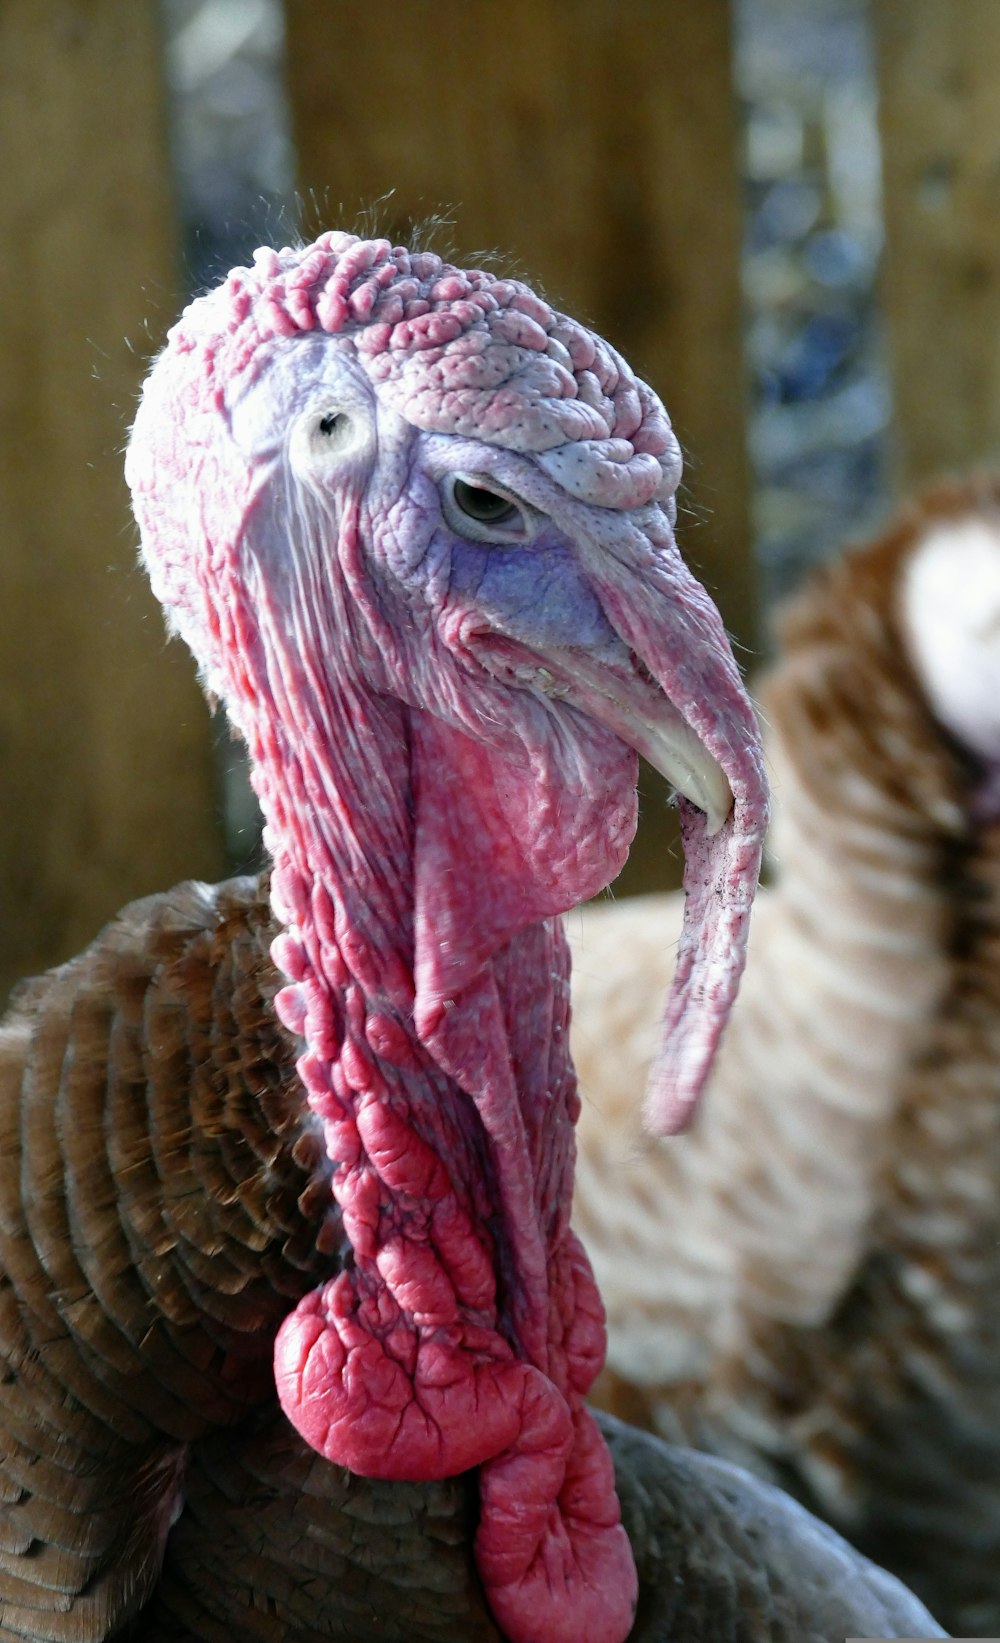 a close up of a turkey's head with other turkeys in the background